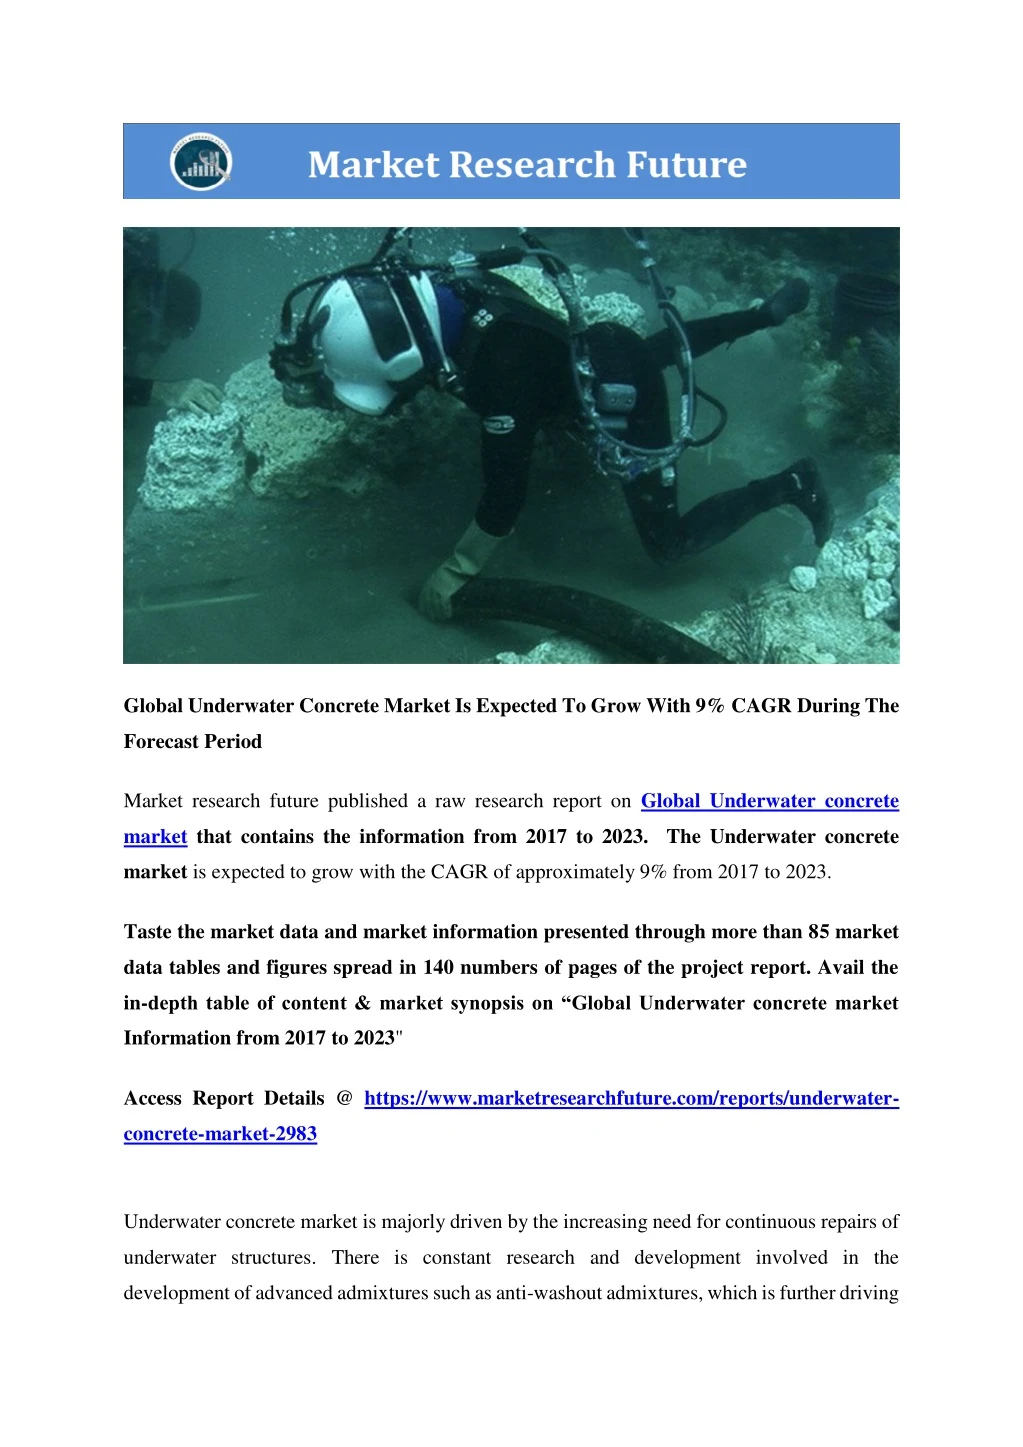 global underwater concrete market is expected